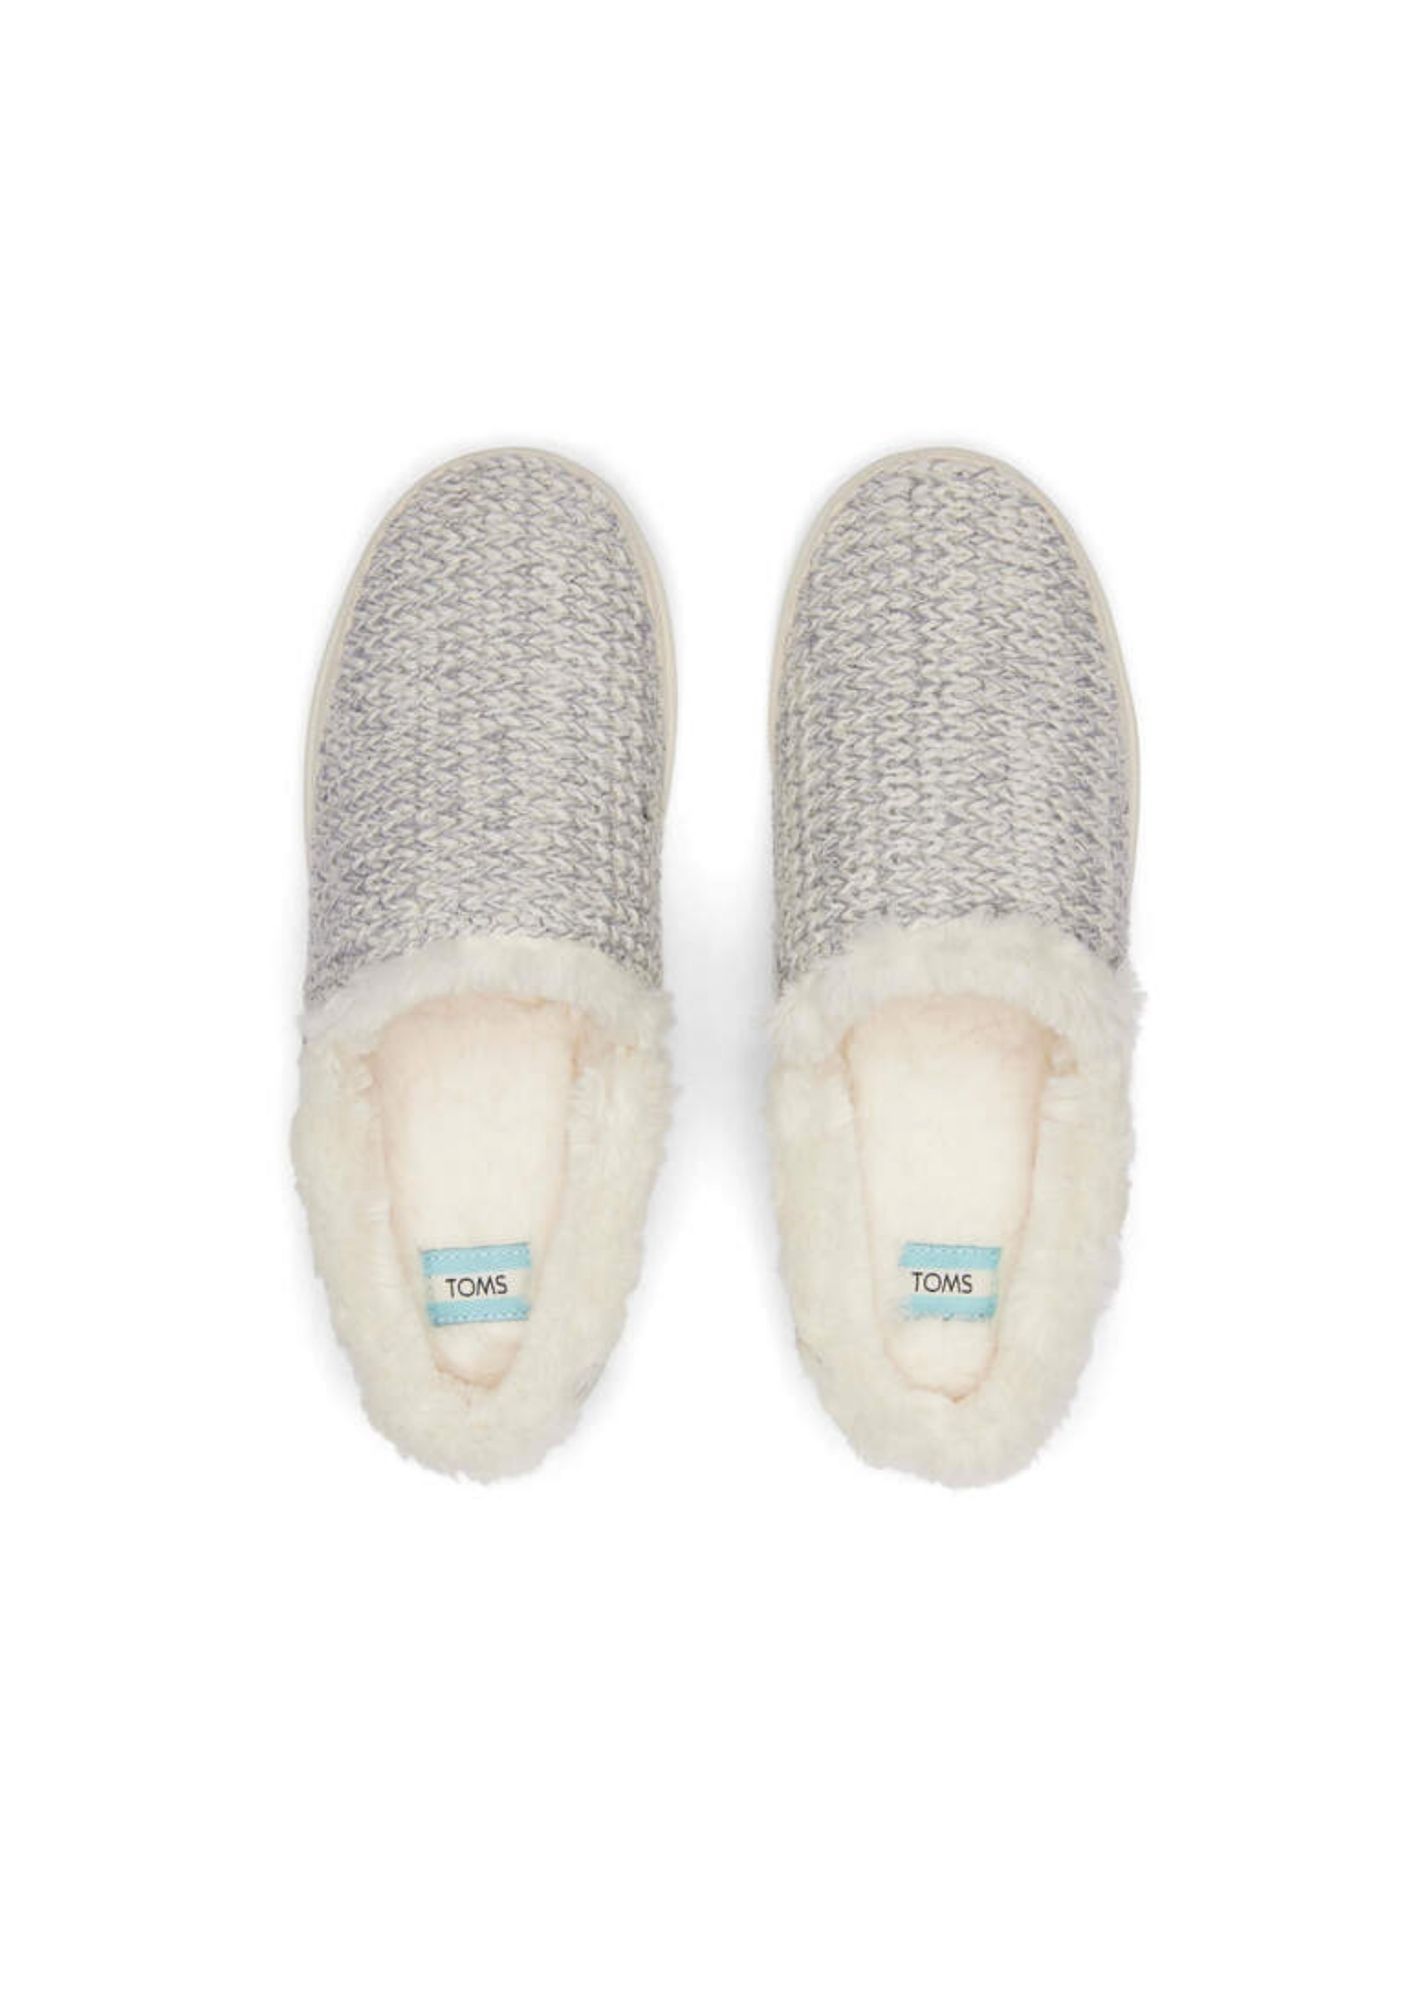 Toms® Gray Sweater Knit Slippers Shoes TOMS